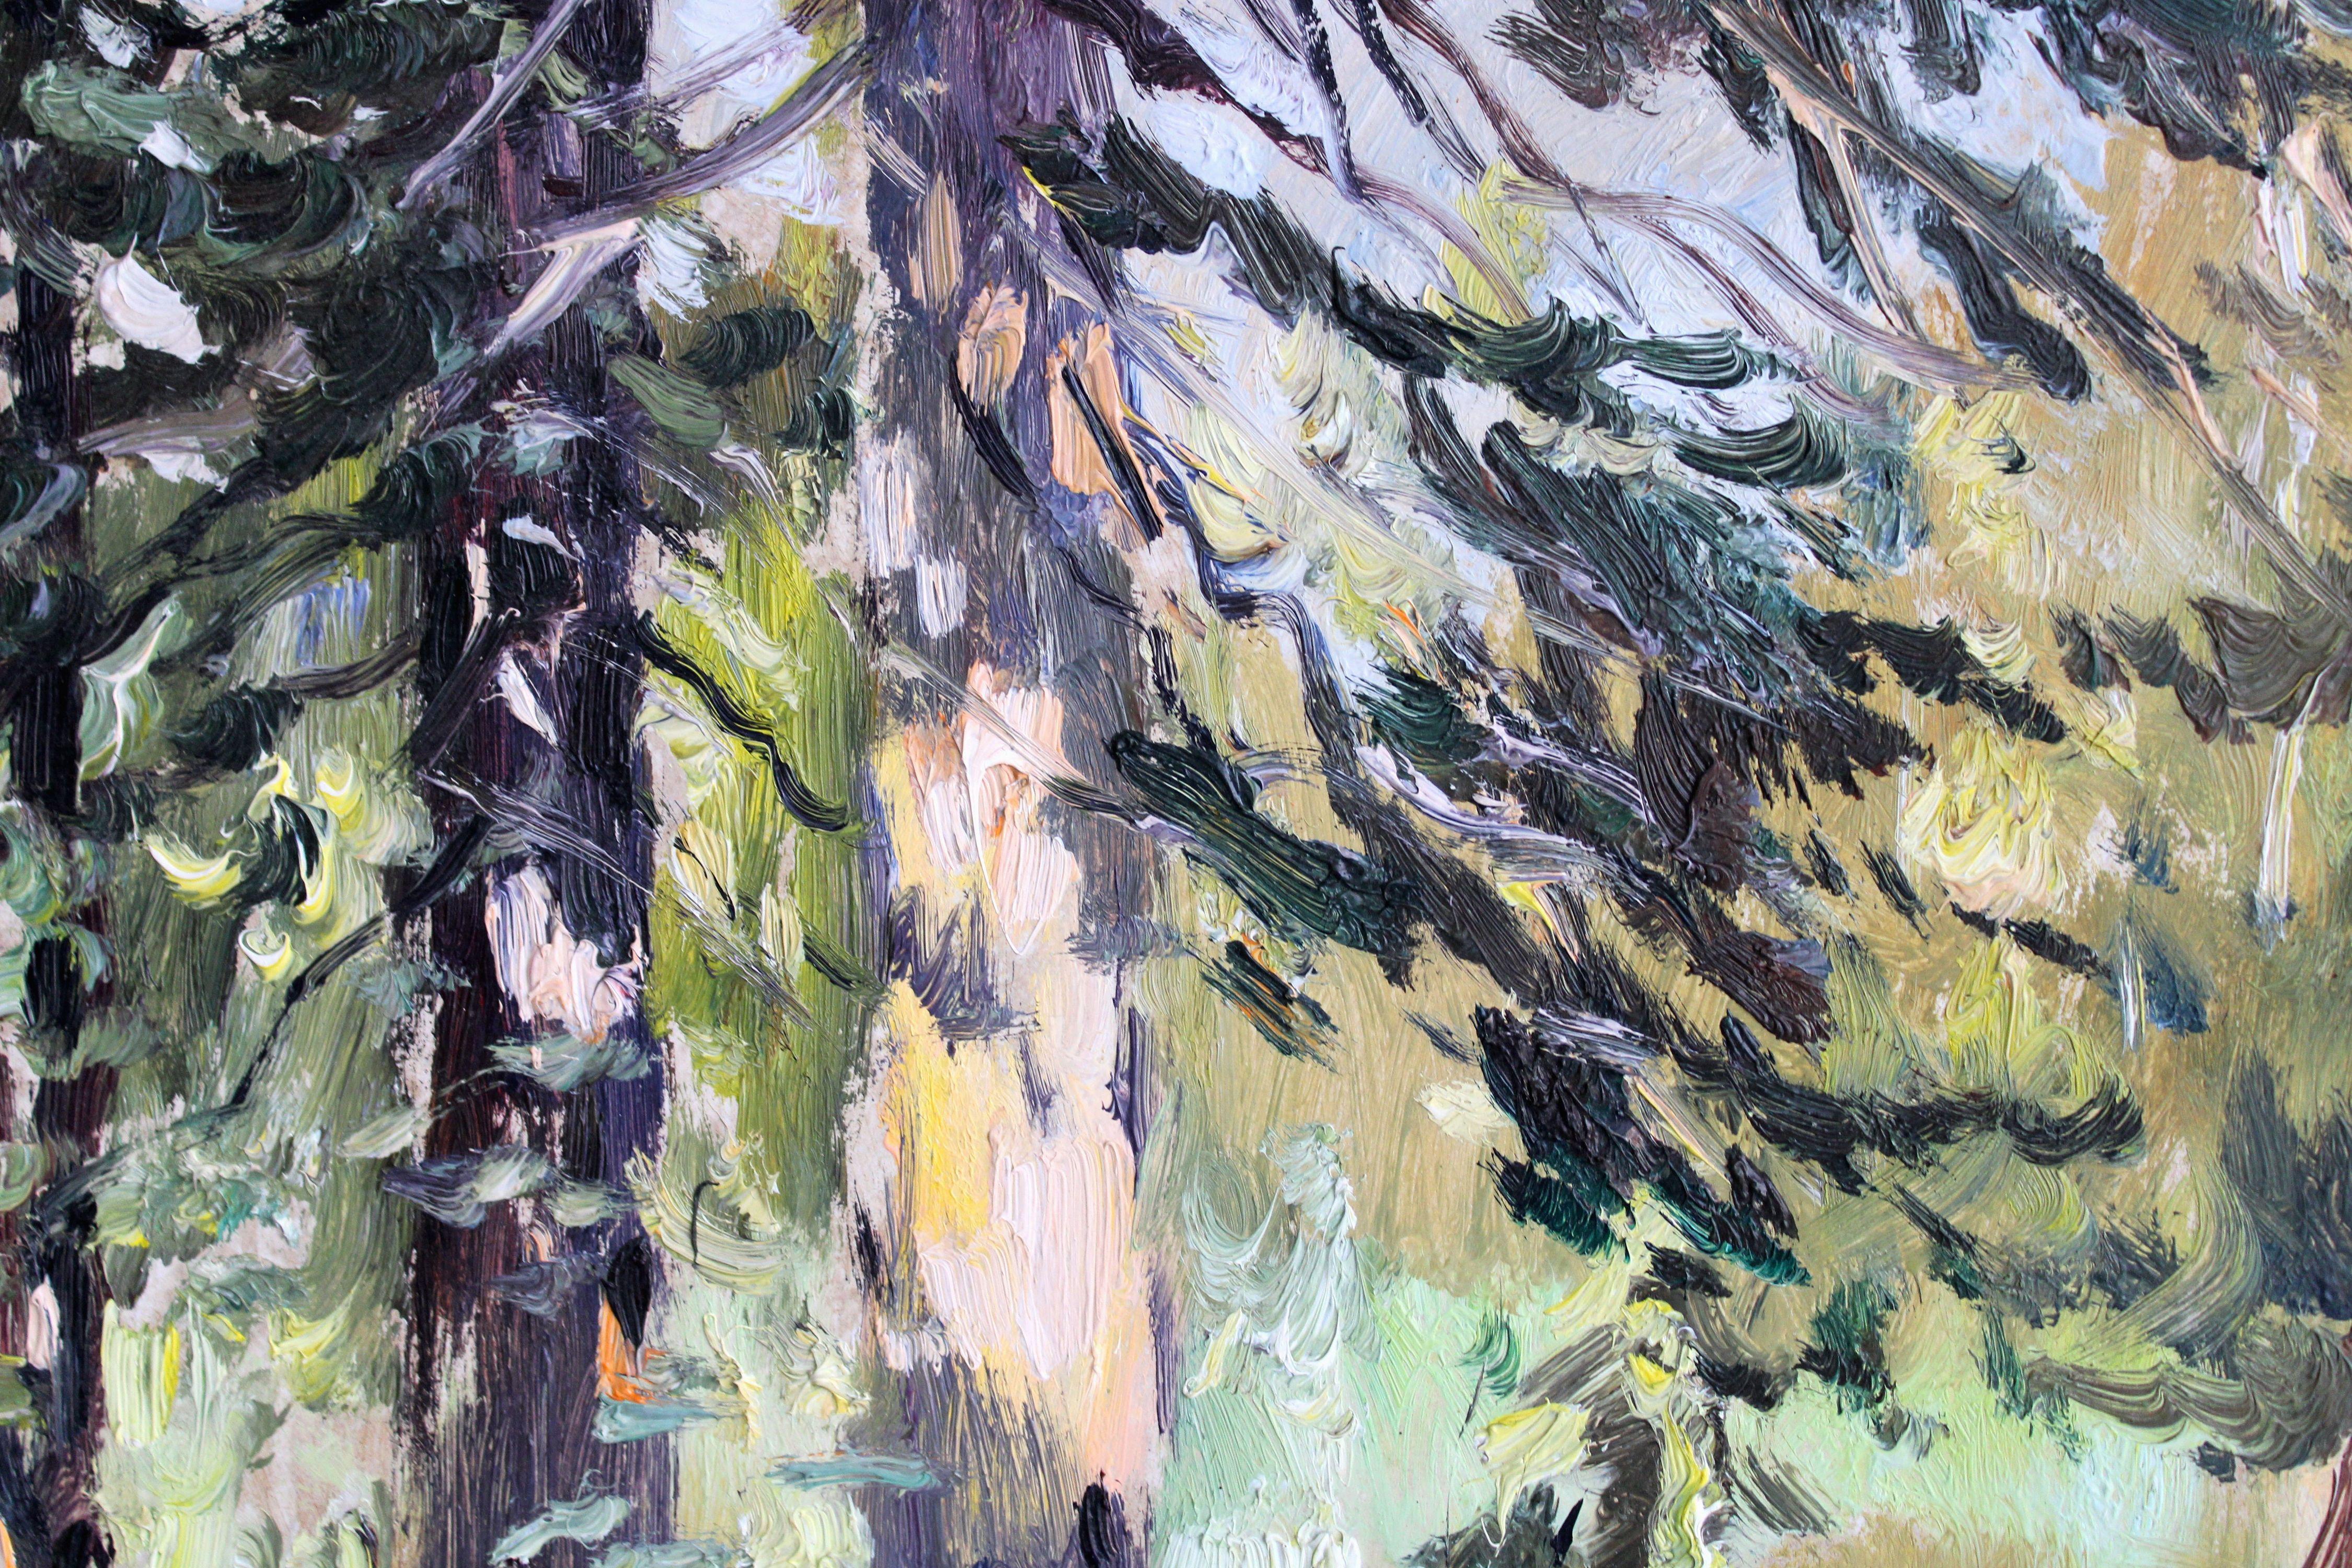 In a sunny forest. Cardboard, oil, 46x66 cm - Impressionist Painting by Edgars Vinters